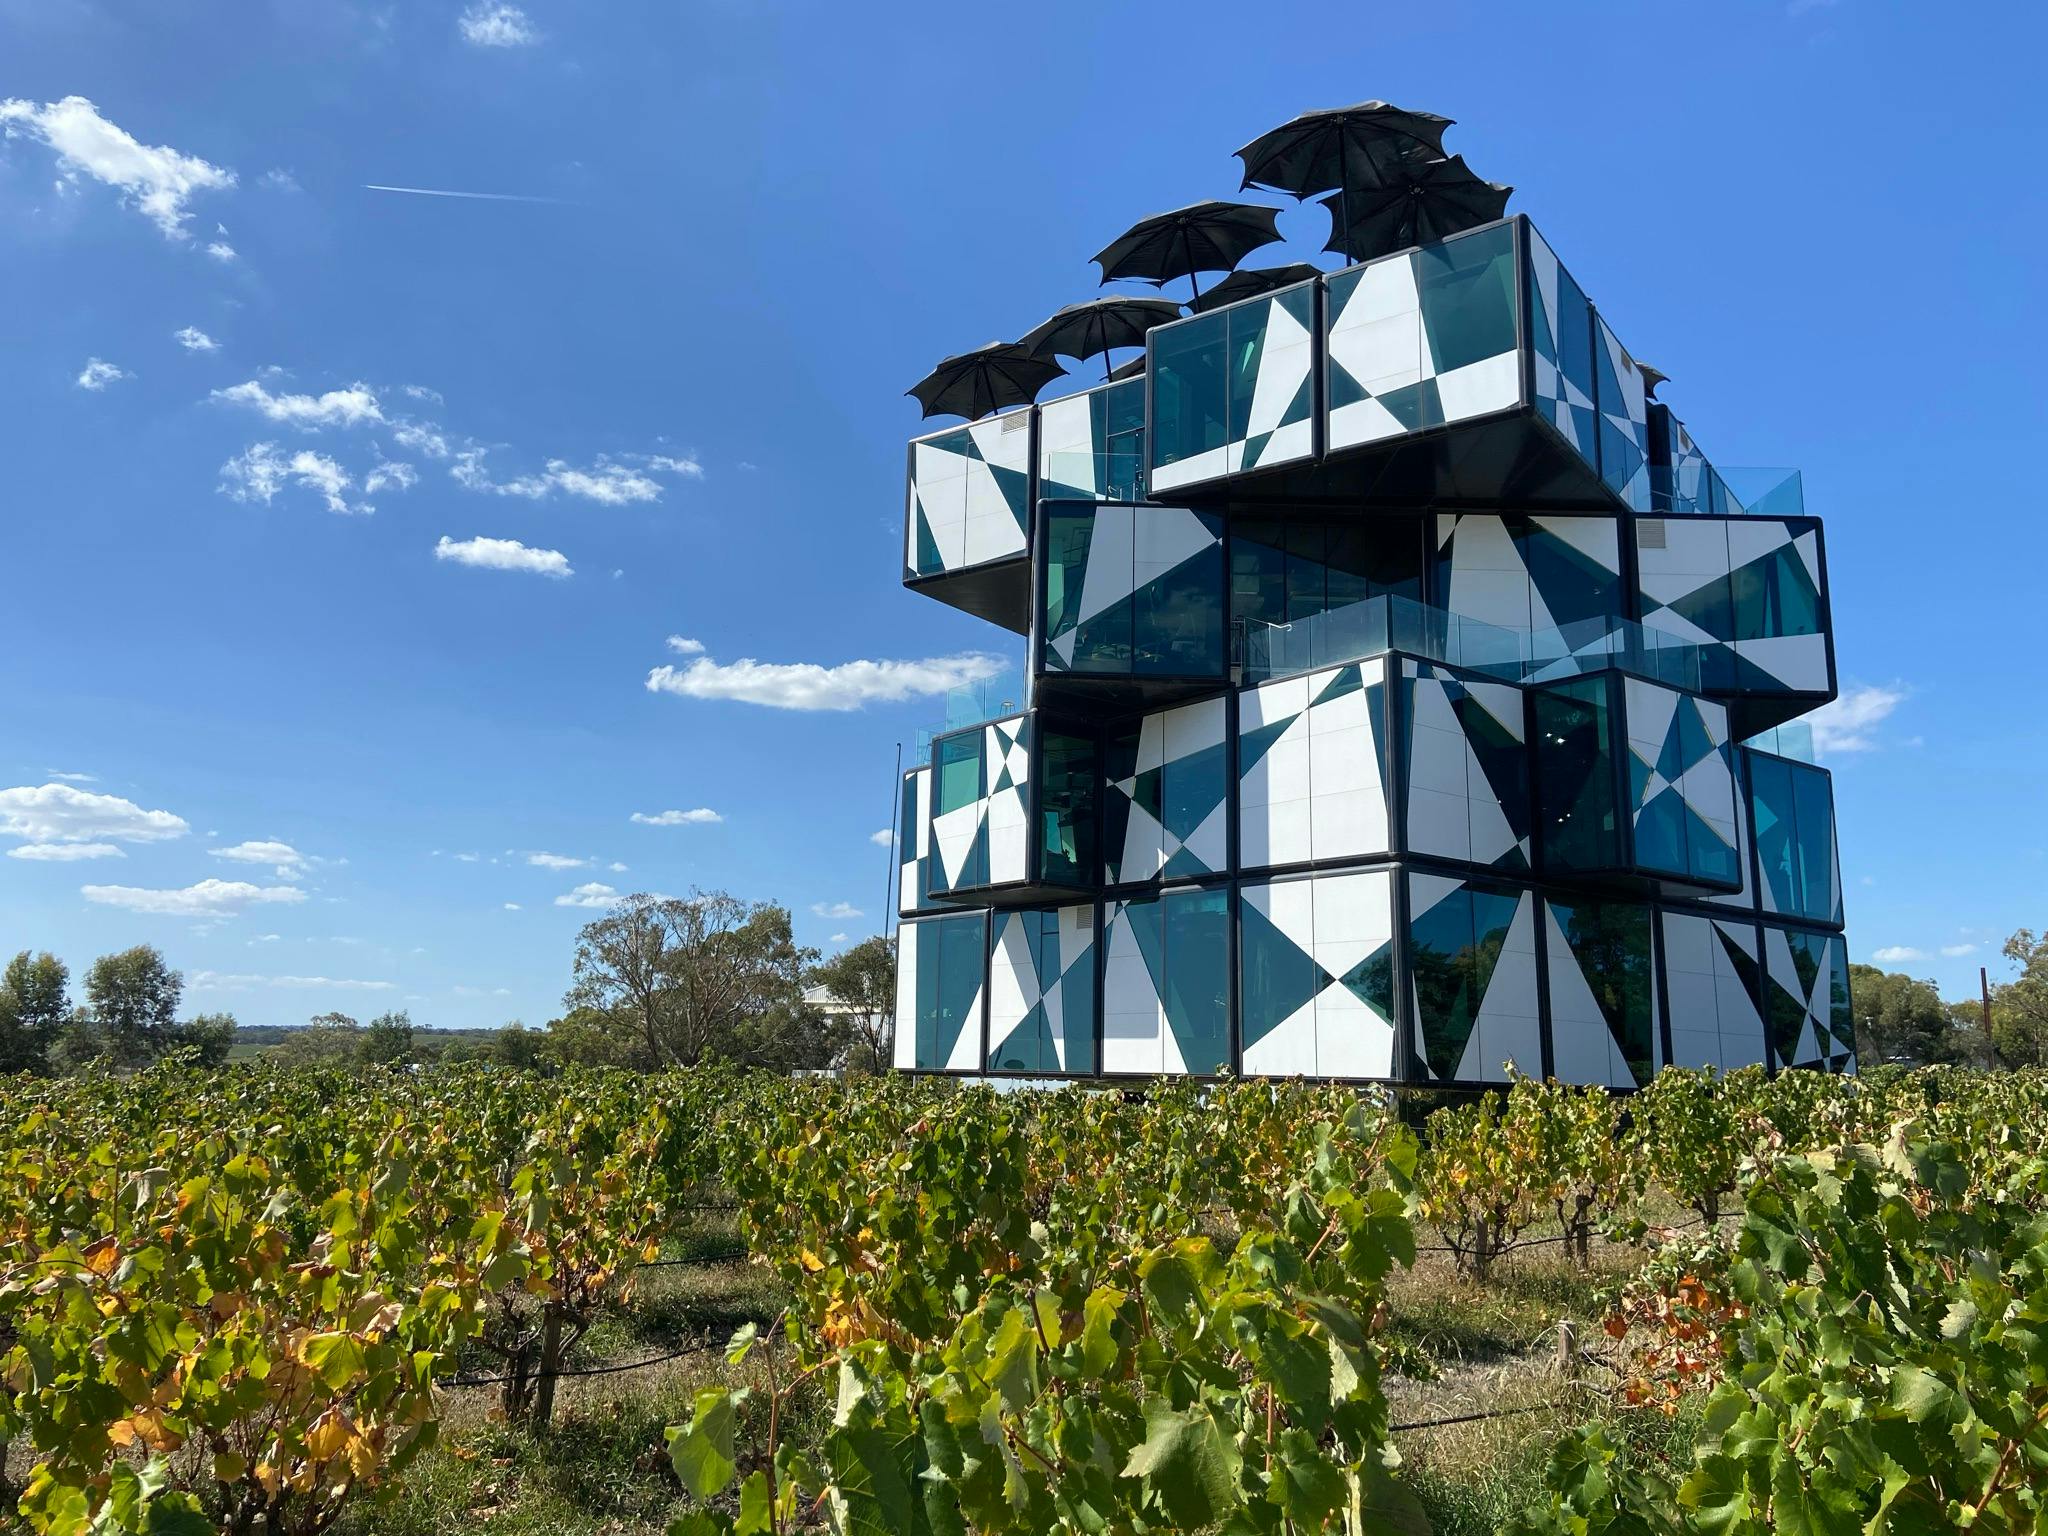 We visit the Cube before enjoying a long lunch at the D'Arenberg vineyards